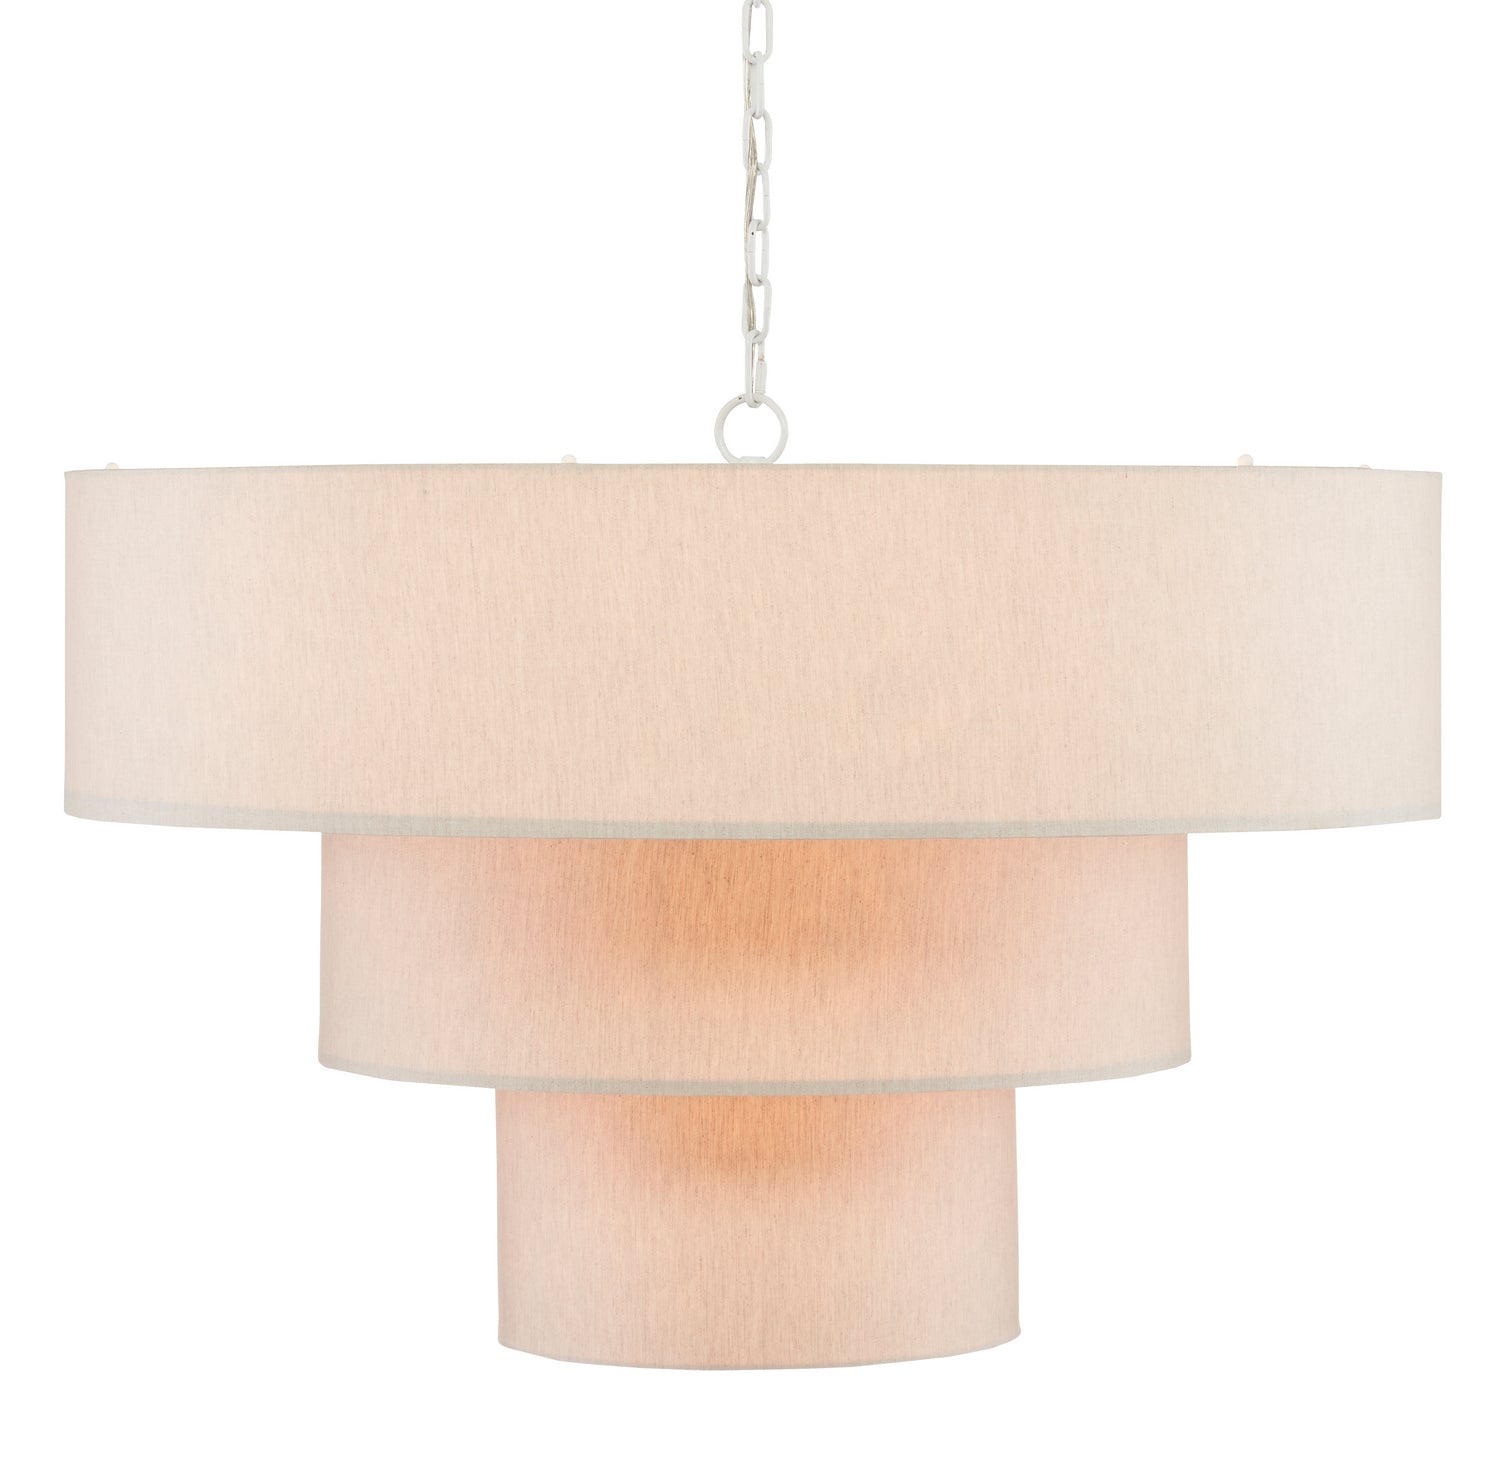 Nine Light Chandelier from the Livello collection in White/Linen finish